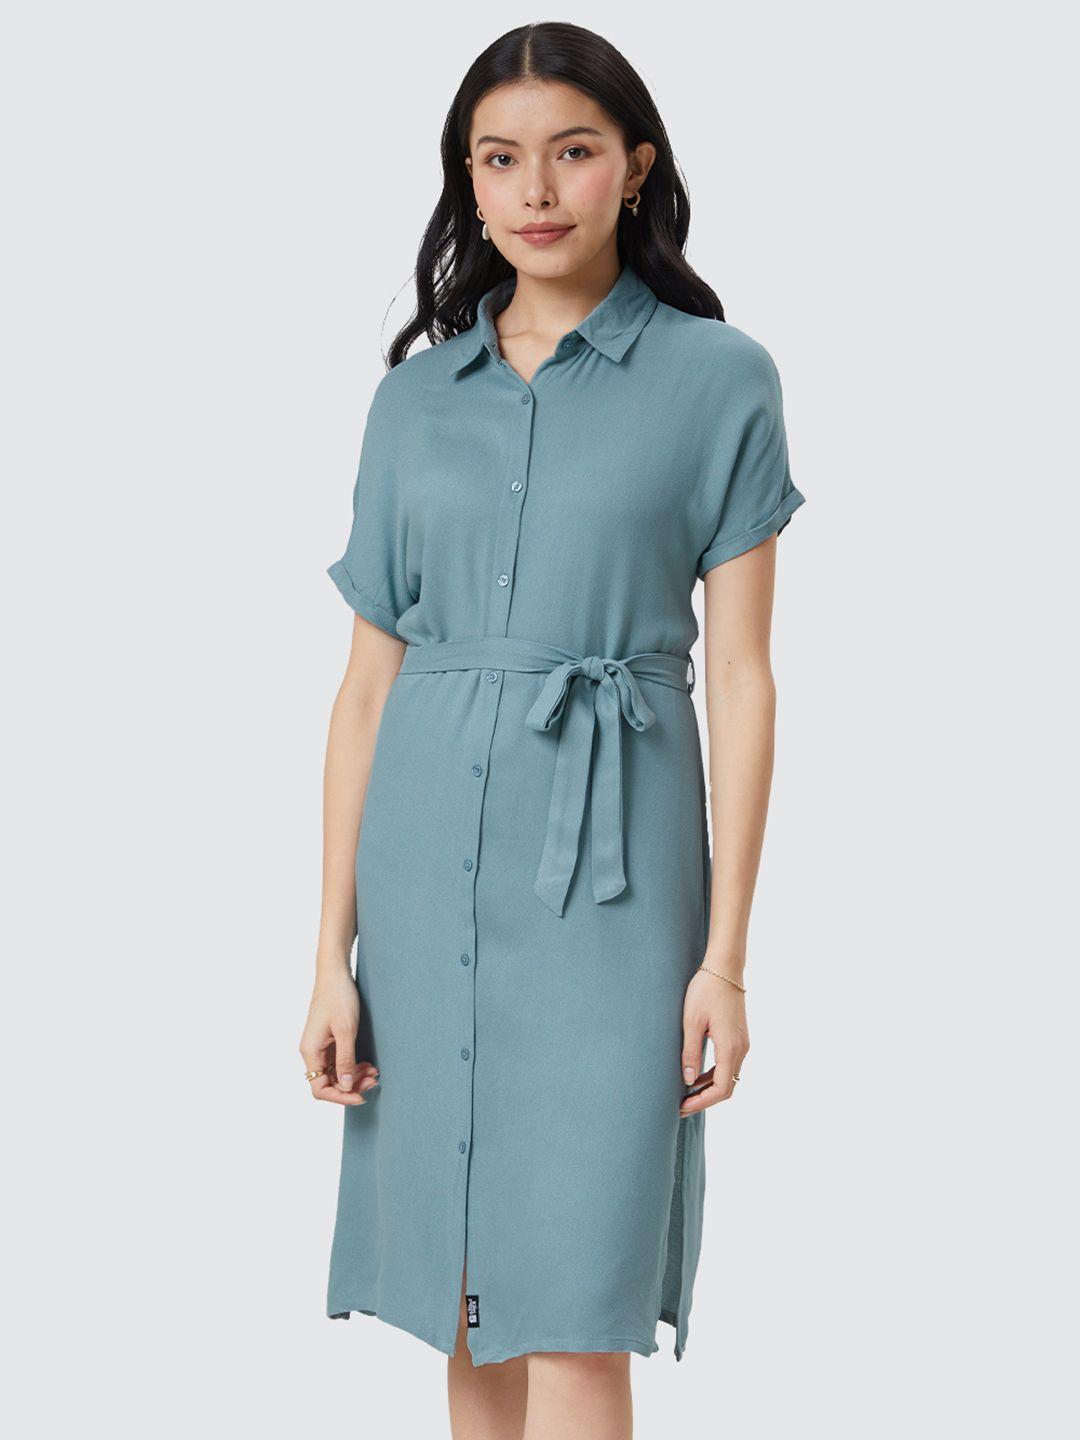 the souled store grey shirt dress